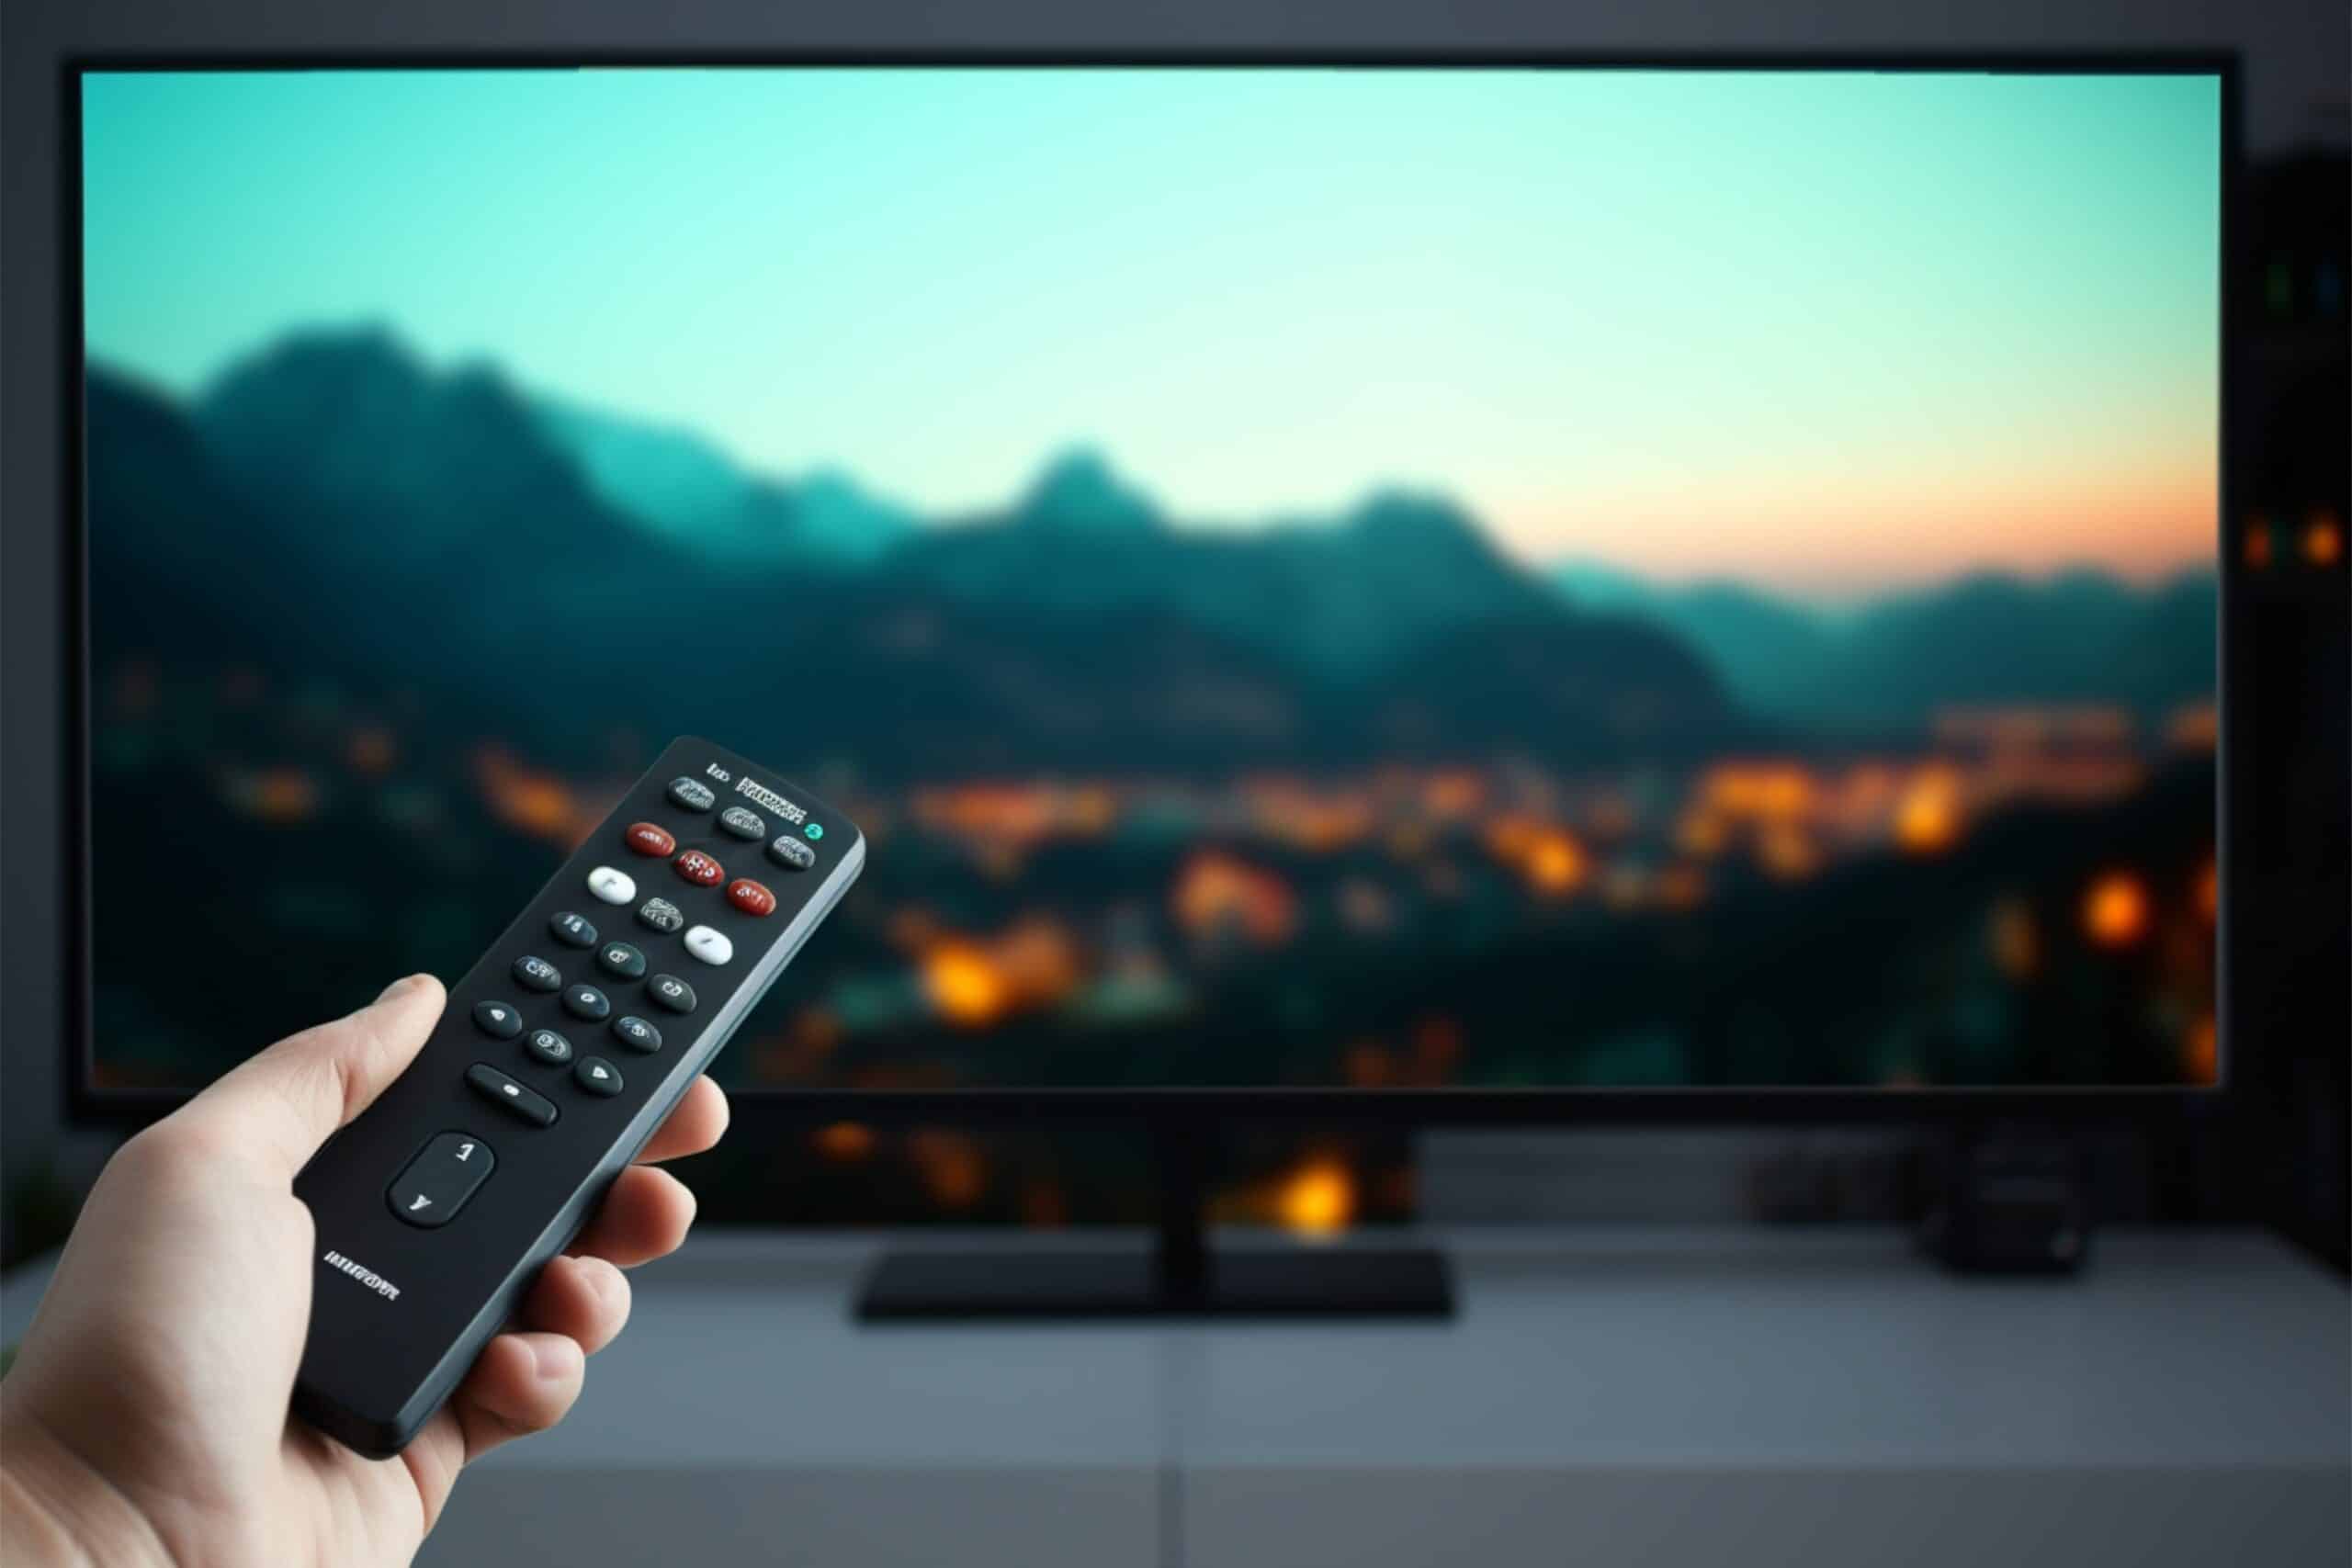 www.appr.com : Can I Connect Alexa To My Smart TV?